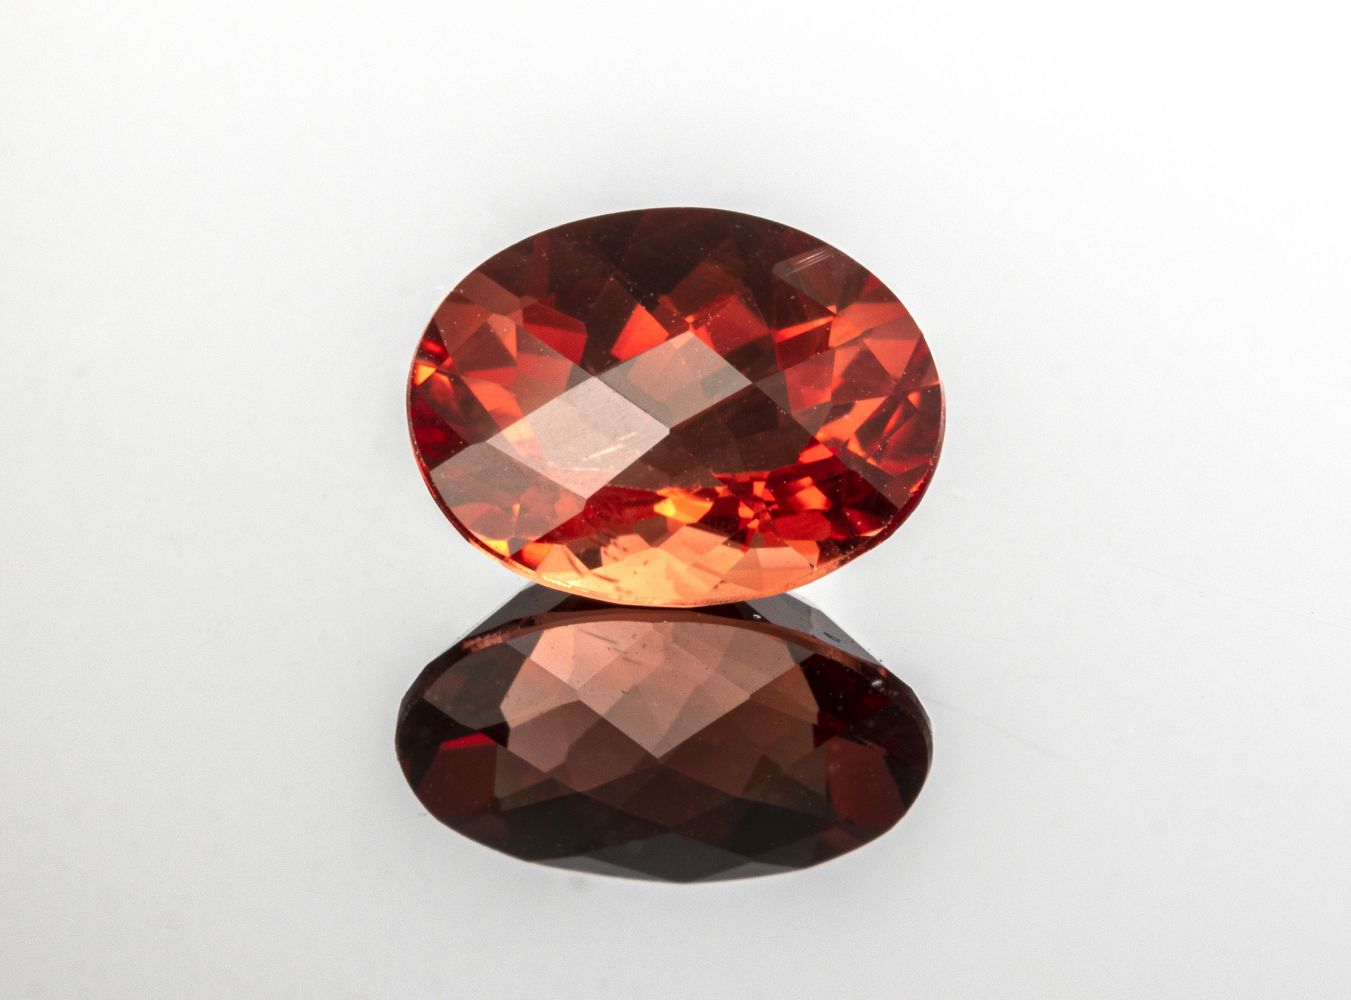 2 30 CT NATURAL OVAL RED ANDESINE 3c5532